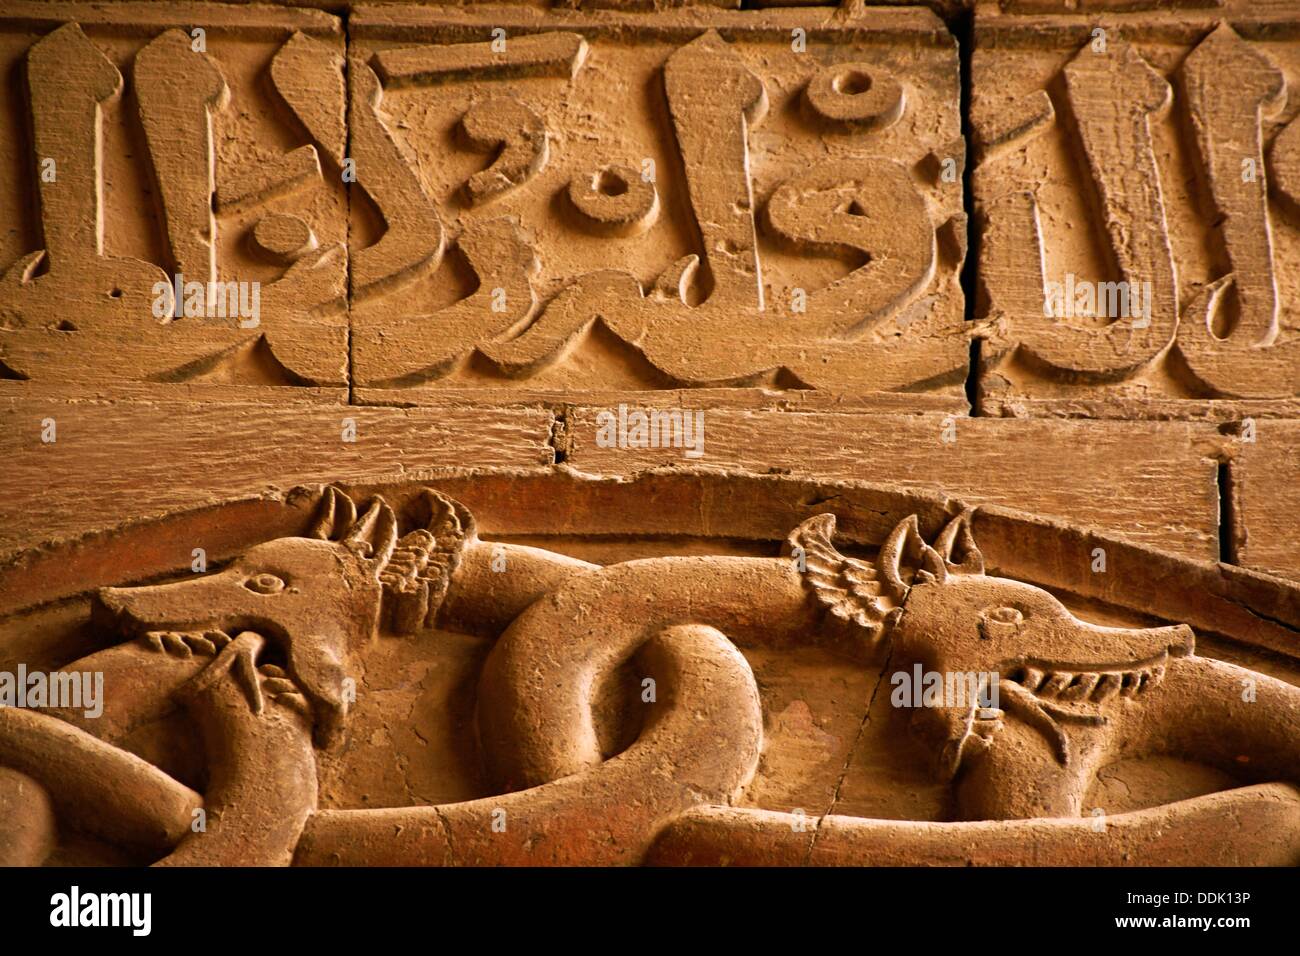 Detail of the Gate of the 2 Snakes inside the Citadel fort, Aleppo, Syria Stock Photo